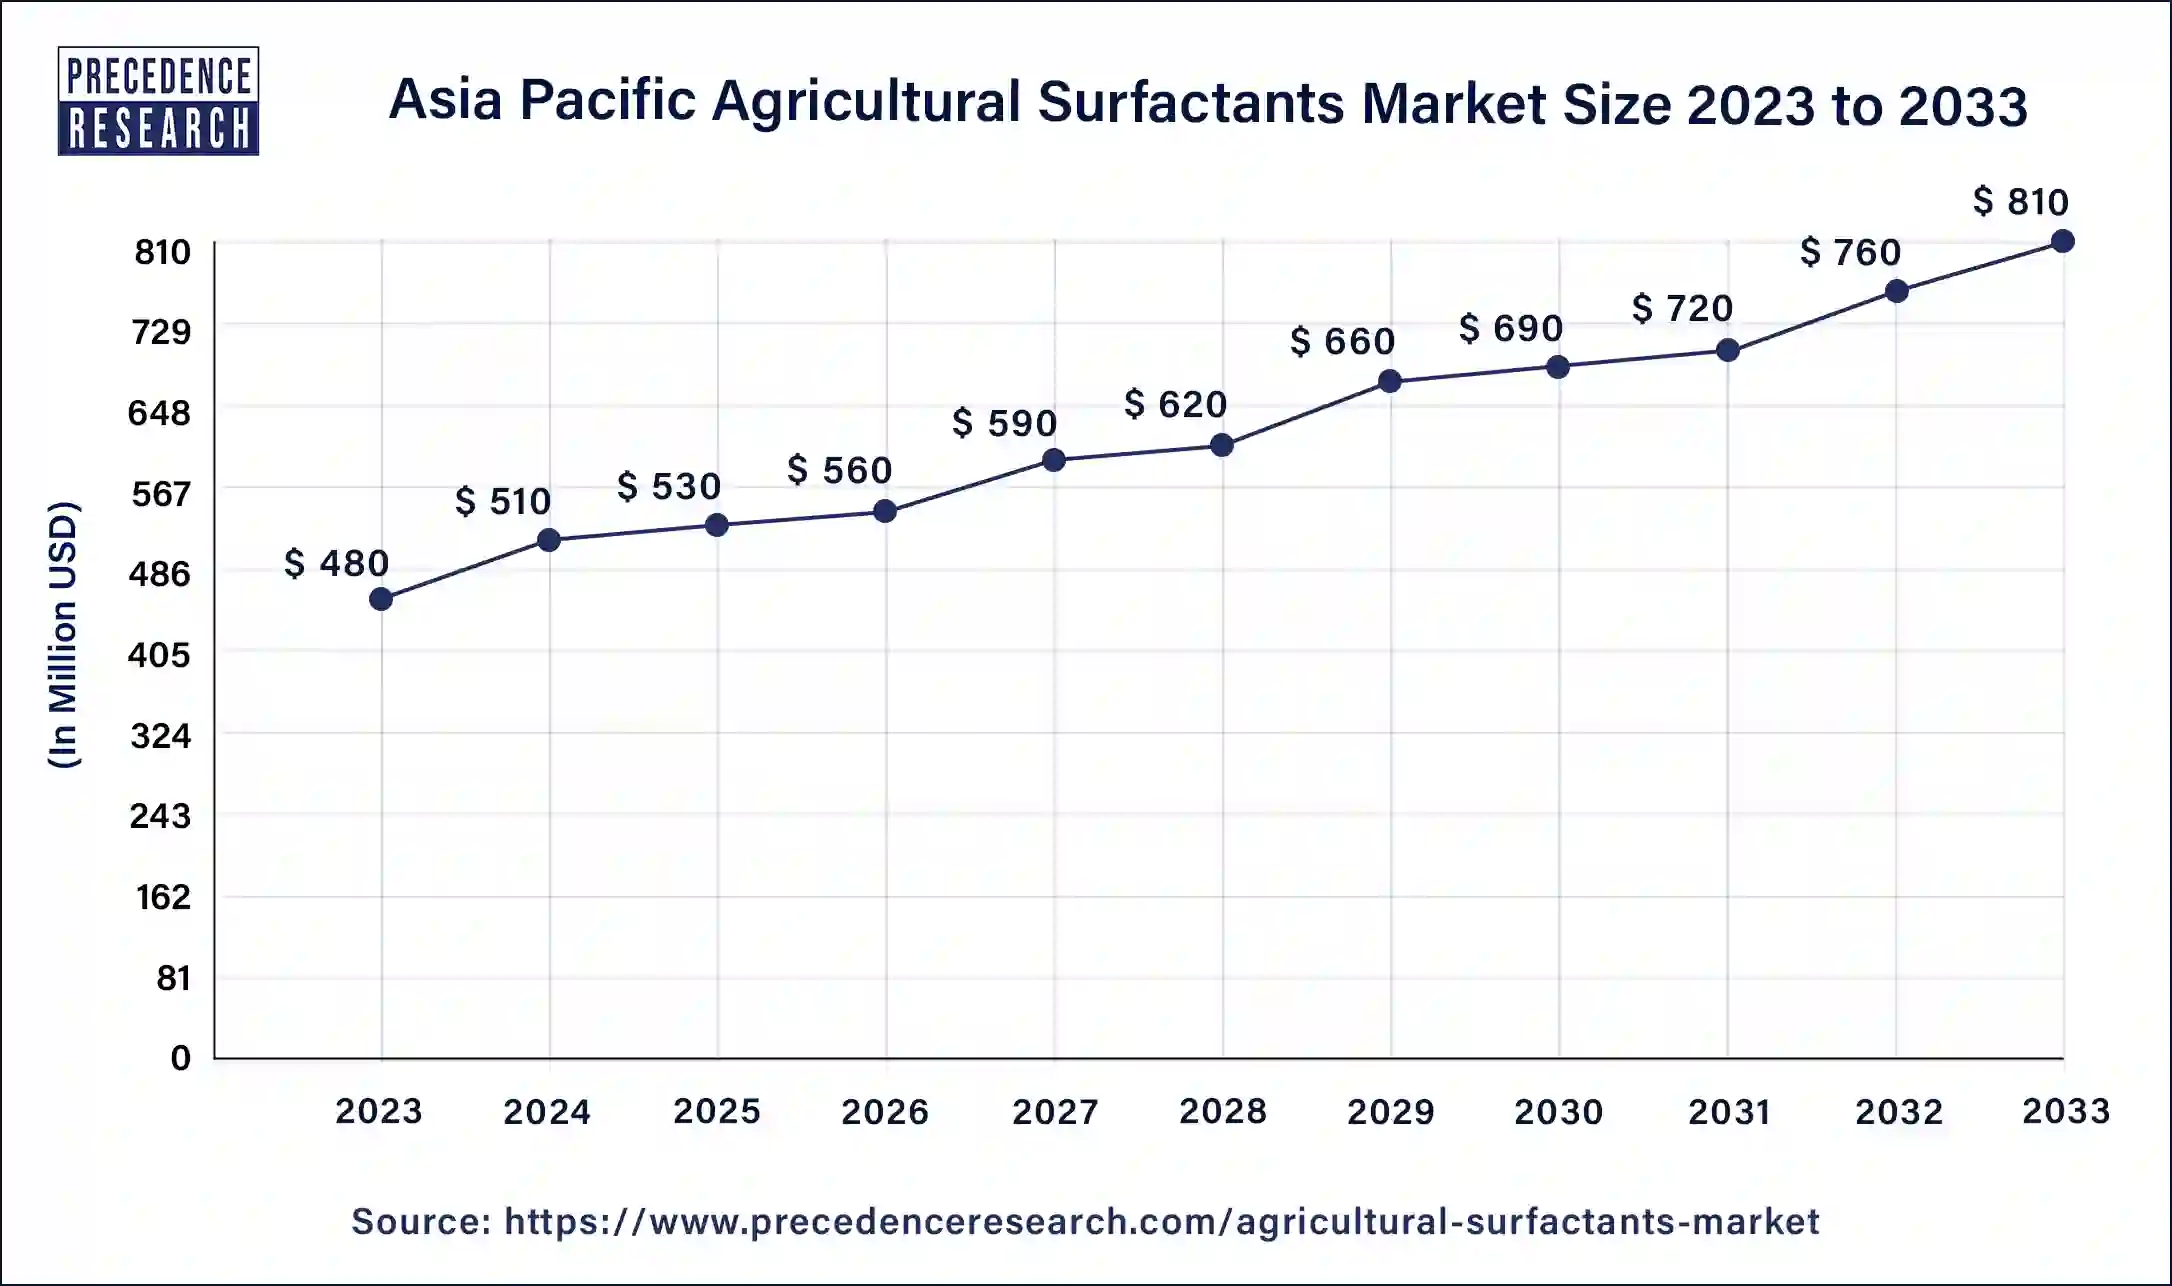 Asia Pacific Agricultural Surfactants Market Size 2024 to 2033